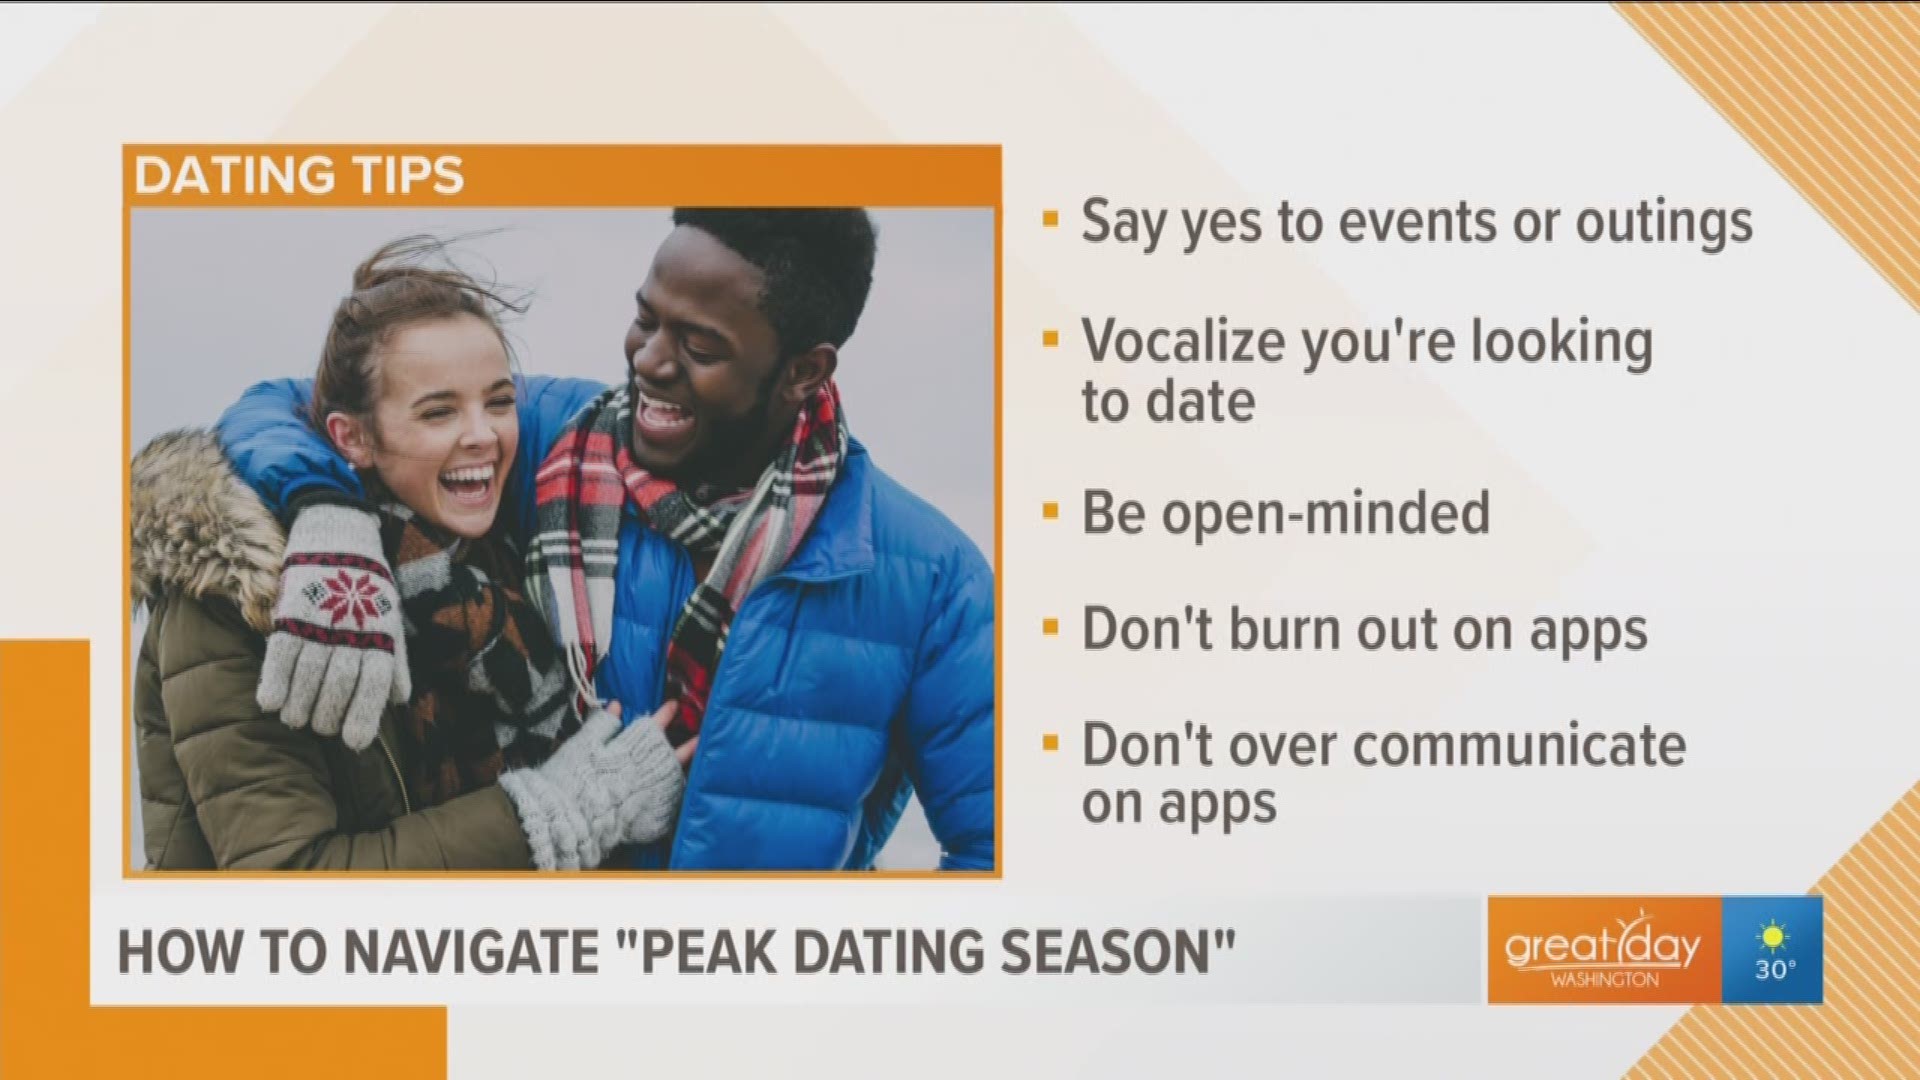 Jaime Bernstein and Callie Harris, senior matchmakers at Three Day Rule Matchmaking share dating tips for peak dating season.